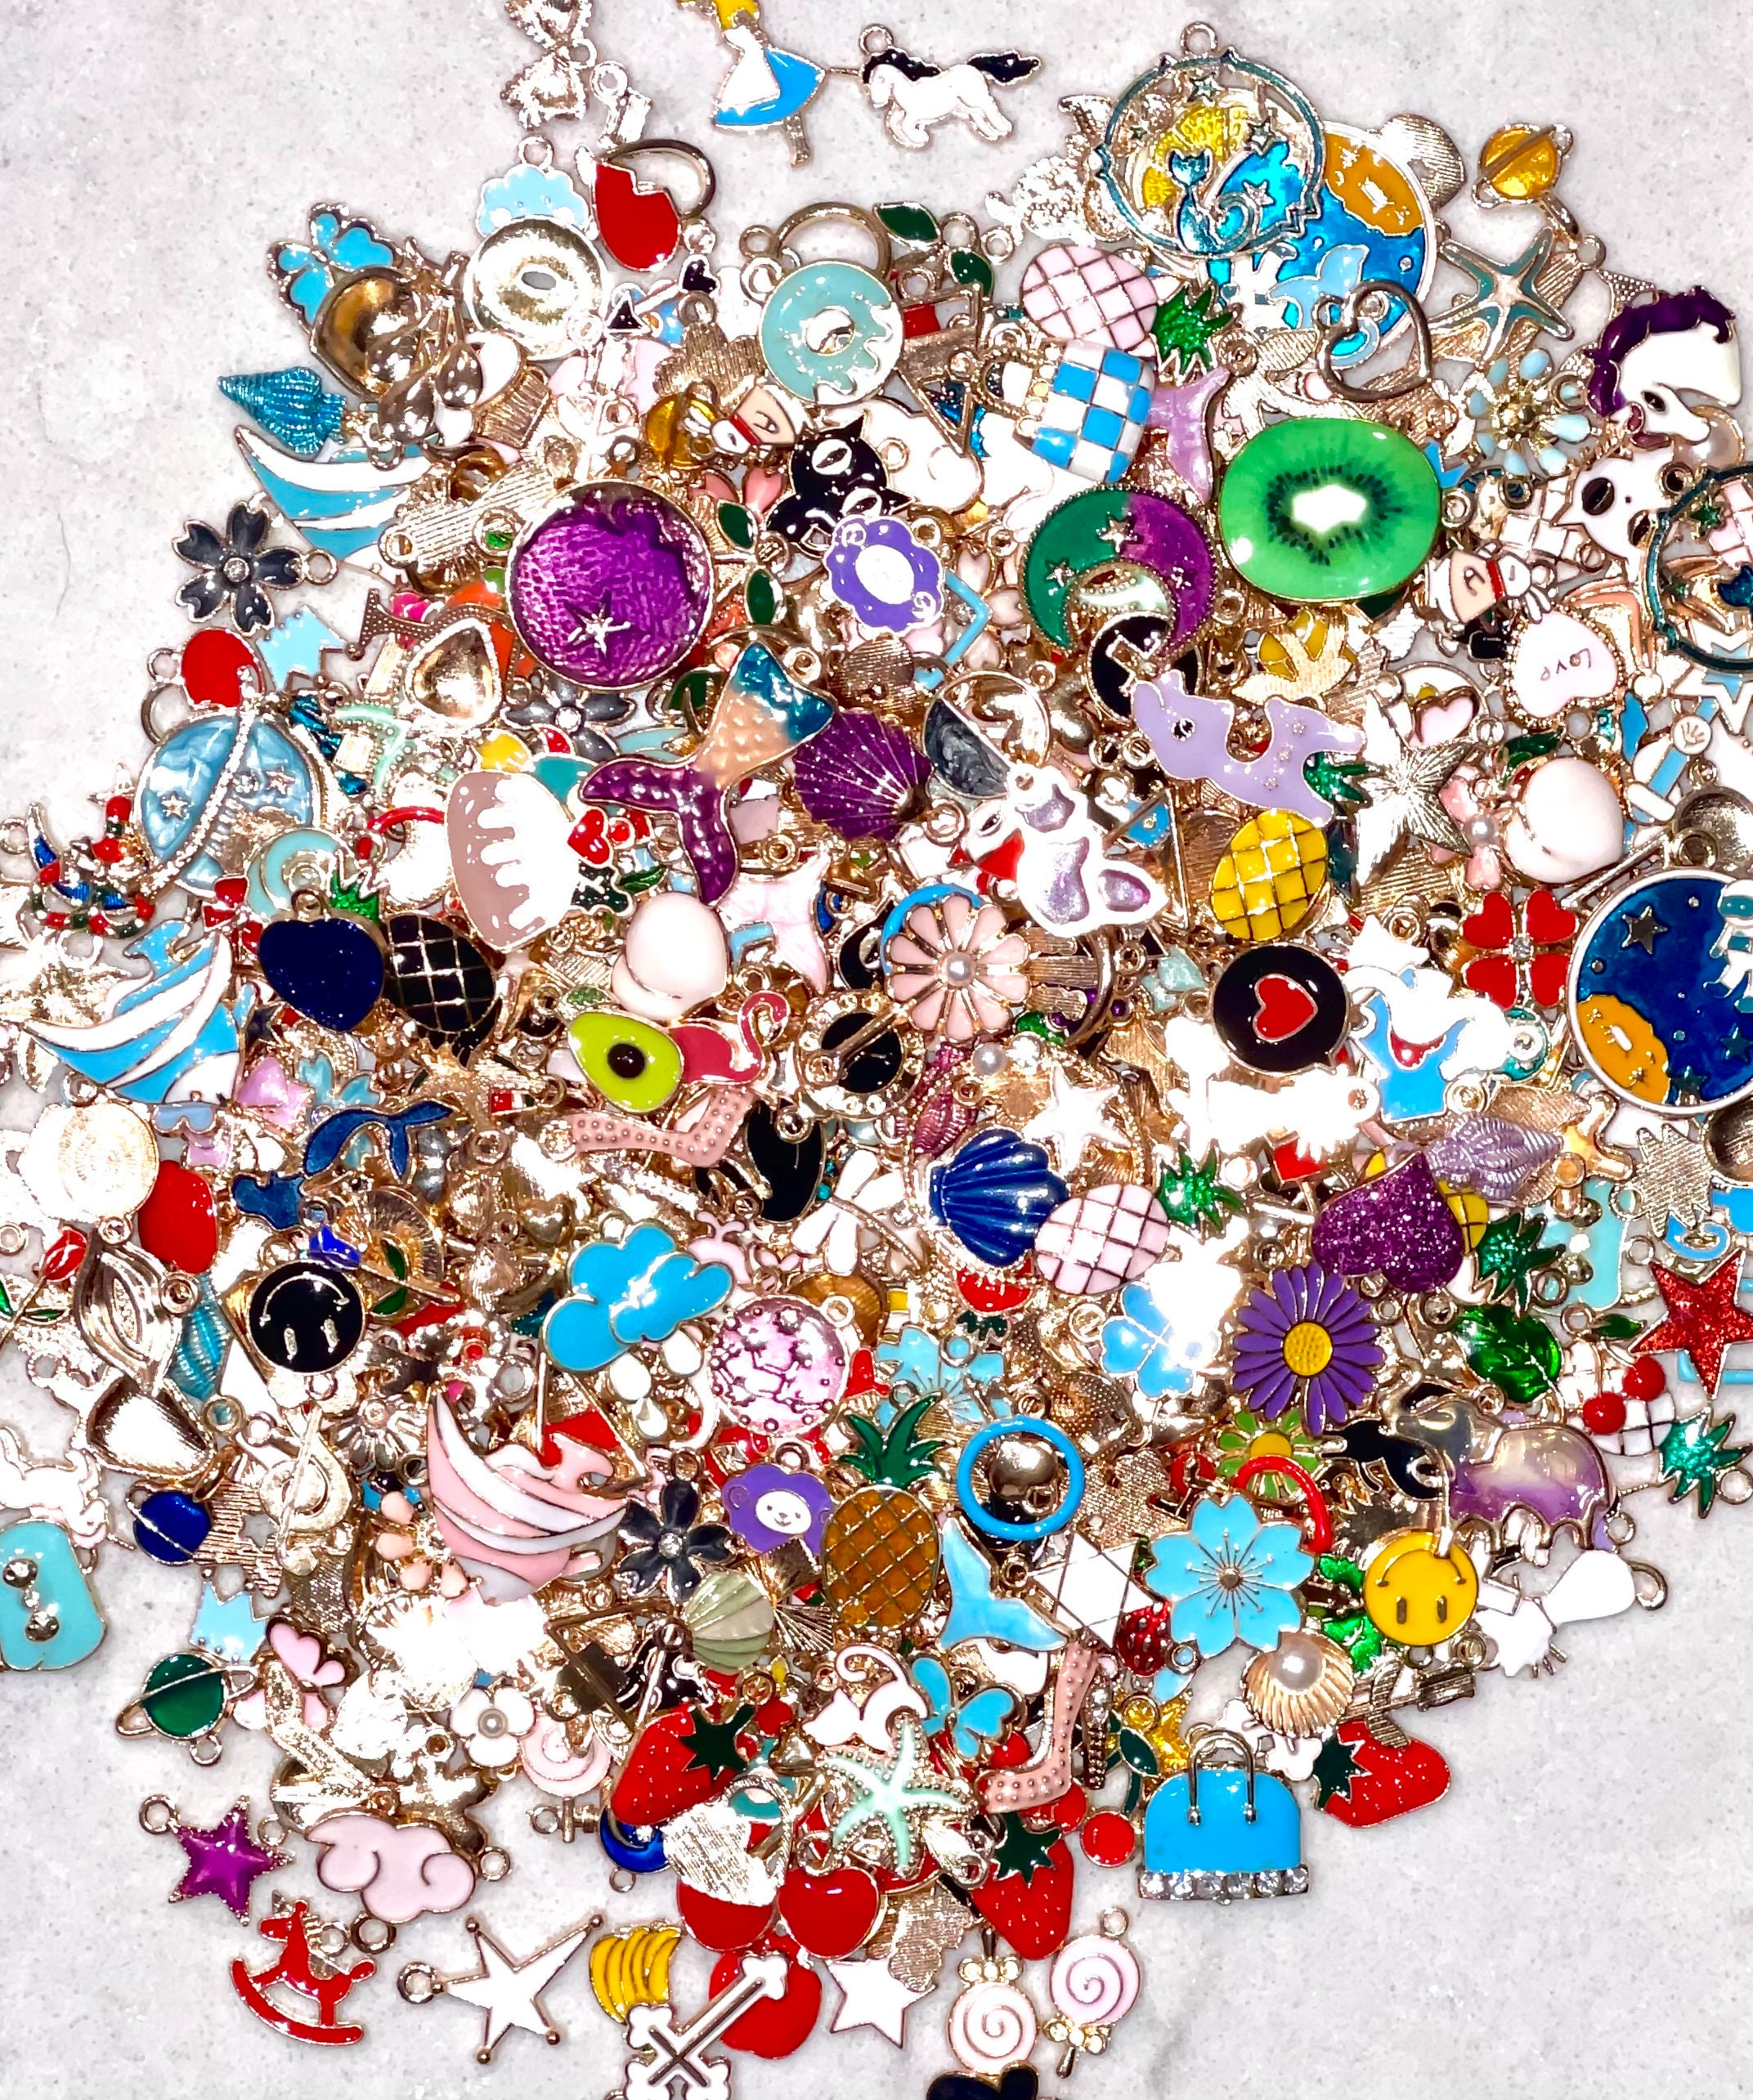 Wholesale 300 Pieces Wholesale Bulk Lots Jewelry Making Charms Pendant  Mixed Shapes Alloy Enamel Charms for Jewelry Necklace Earring Making Crafts  